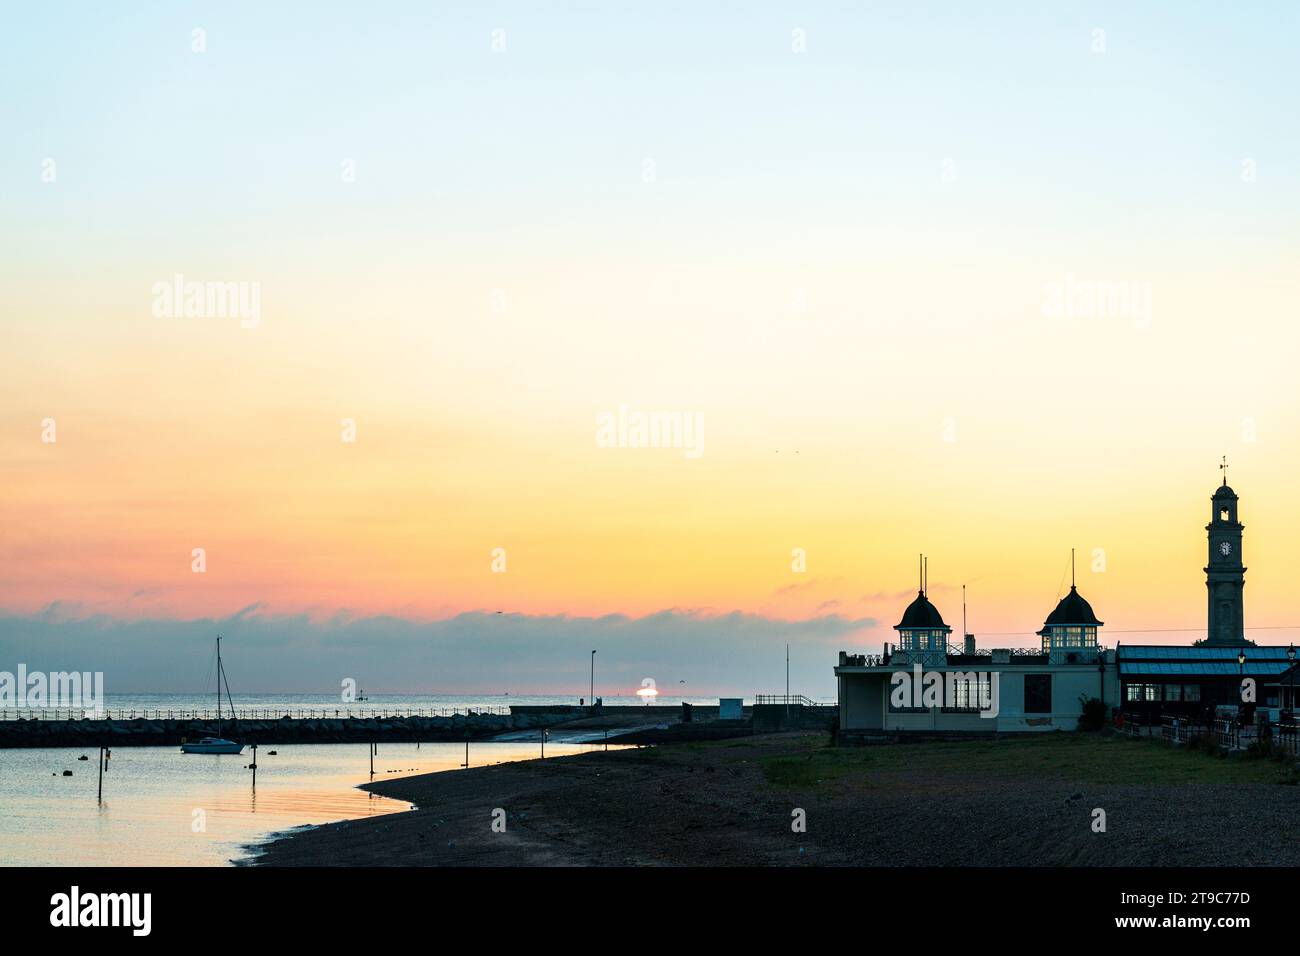 Sunrise over the seafront at Herne Bay with the Art Deco central bandstand, and the clock tower standing against the orange yellow sky. Stock Photo